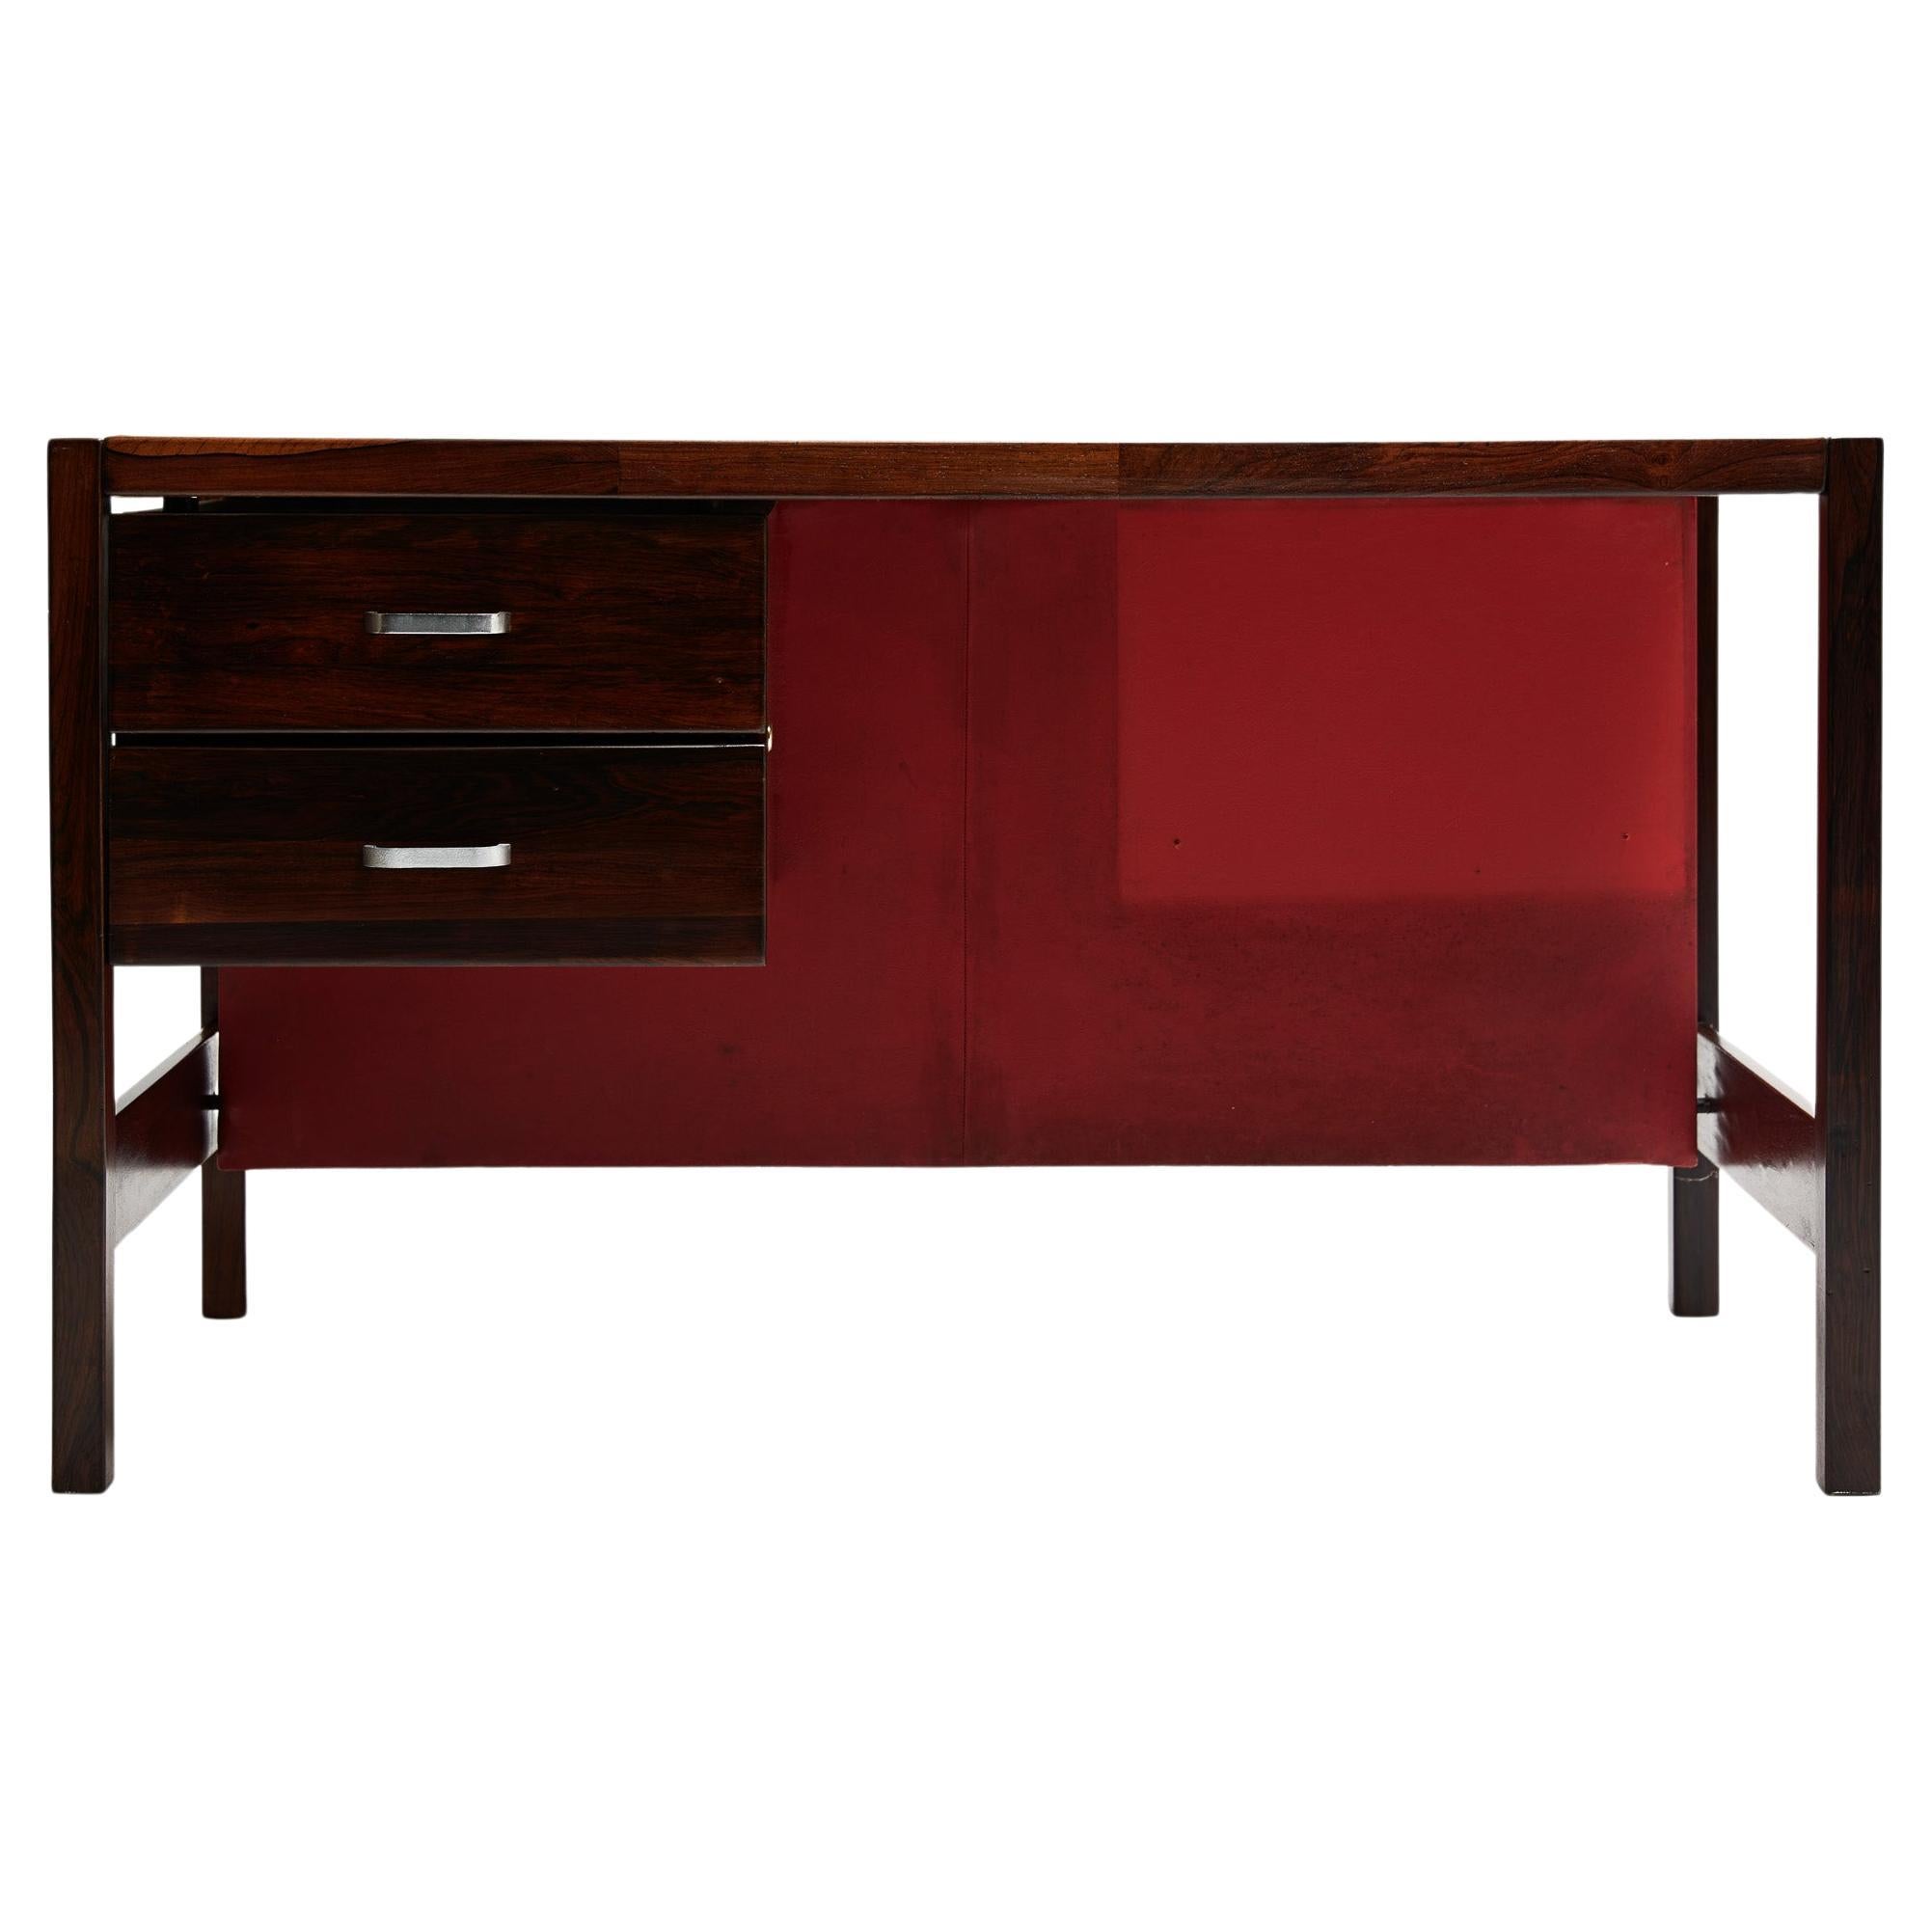 Available today, this Mid-Century Modern Desk in Hardwood by Jorge Zalszupin for L’Atelier in the sixties is stunning!

This beautiful desk is made in solid Brazilian Rosewood, known as Jacaranda and has two floating drawers with metal handles.